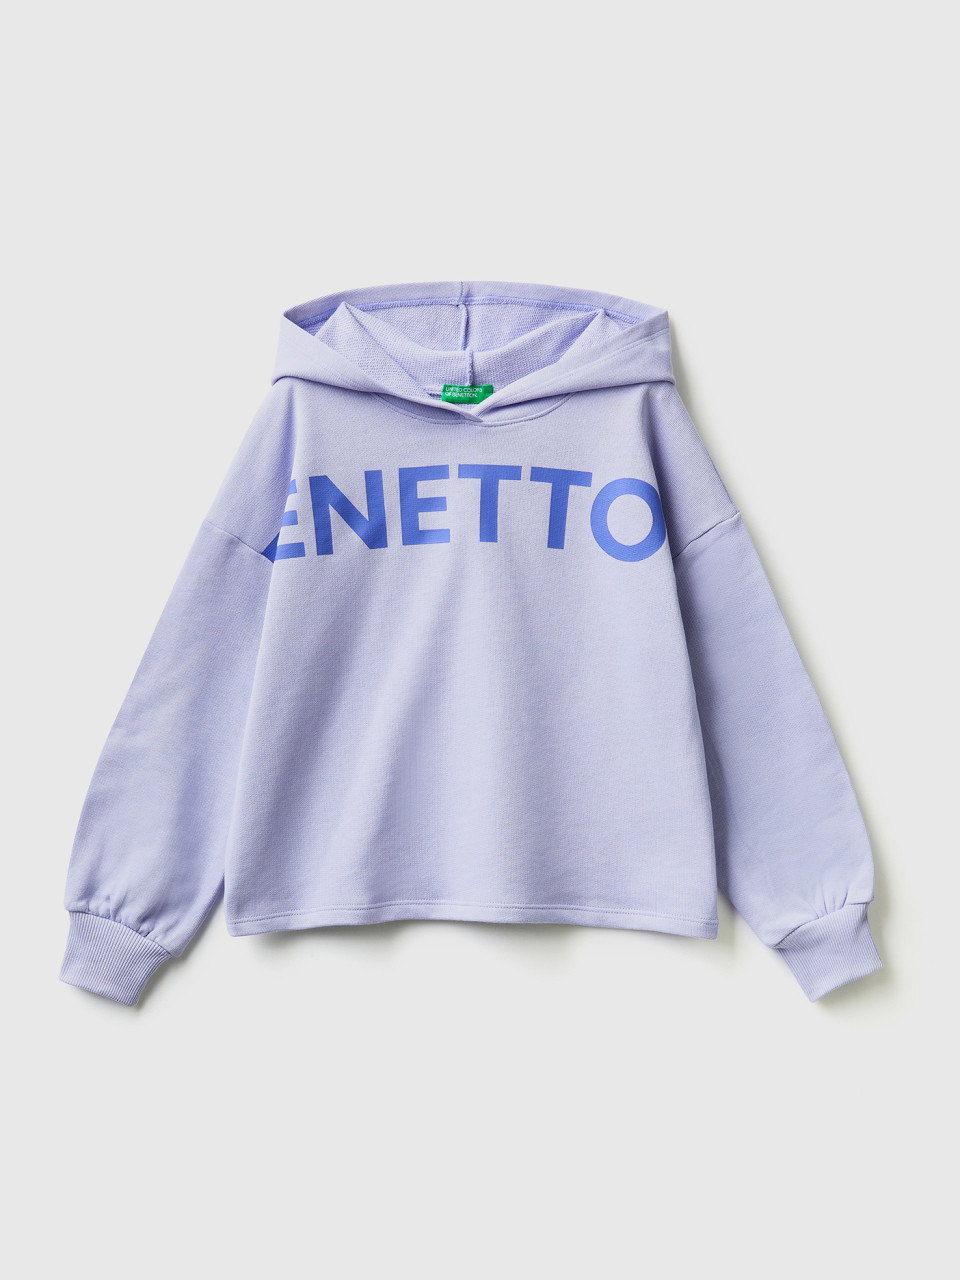 Benetton, Oversized Fit Hoodie, Lilac, Kids